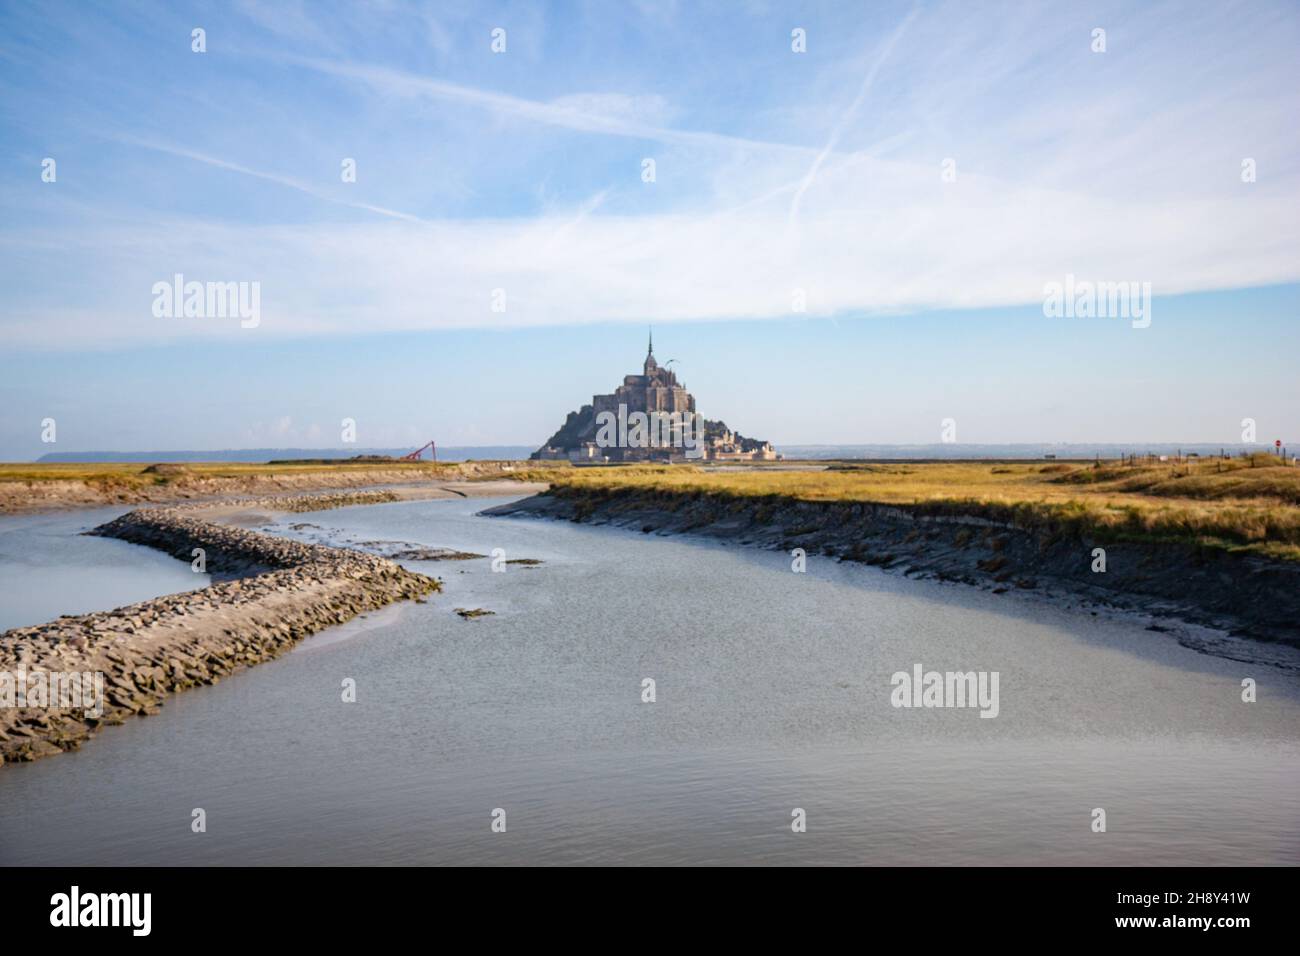 Mont Saint-Michel looking over the banks of the Couesnon river, France Stock Photo